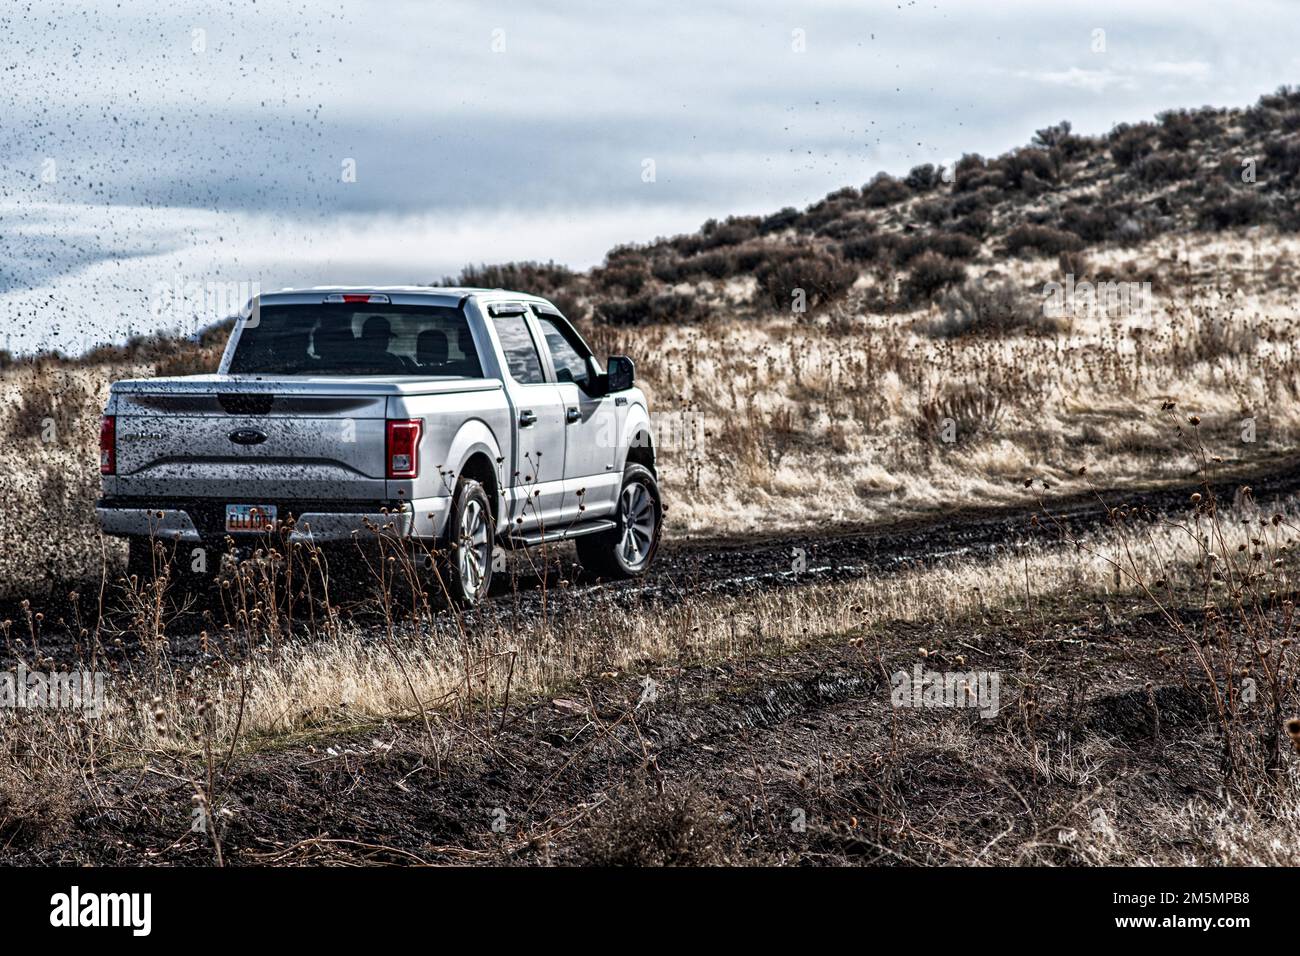 The Ford F150 Silver Truck Car 4x4 SUV driving in the mud Stock Photo